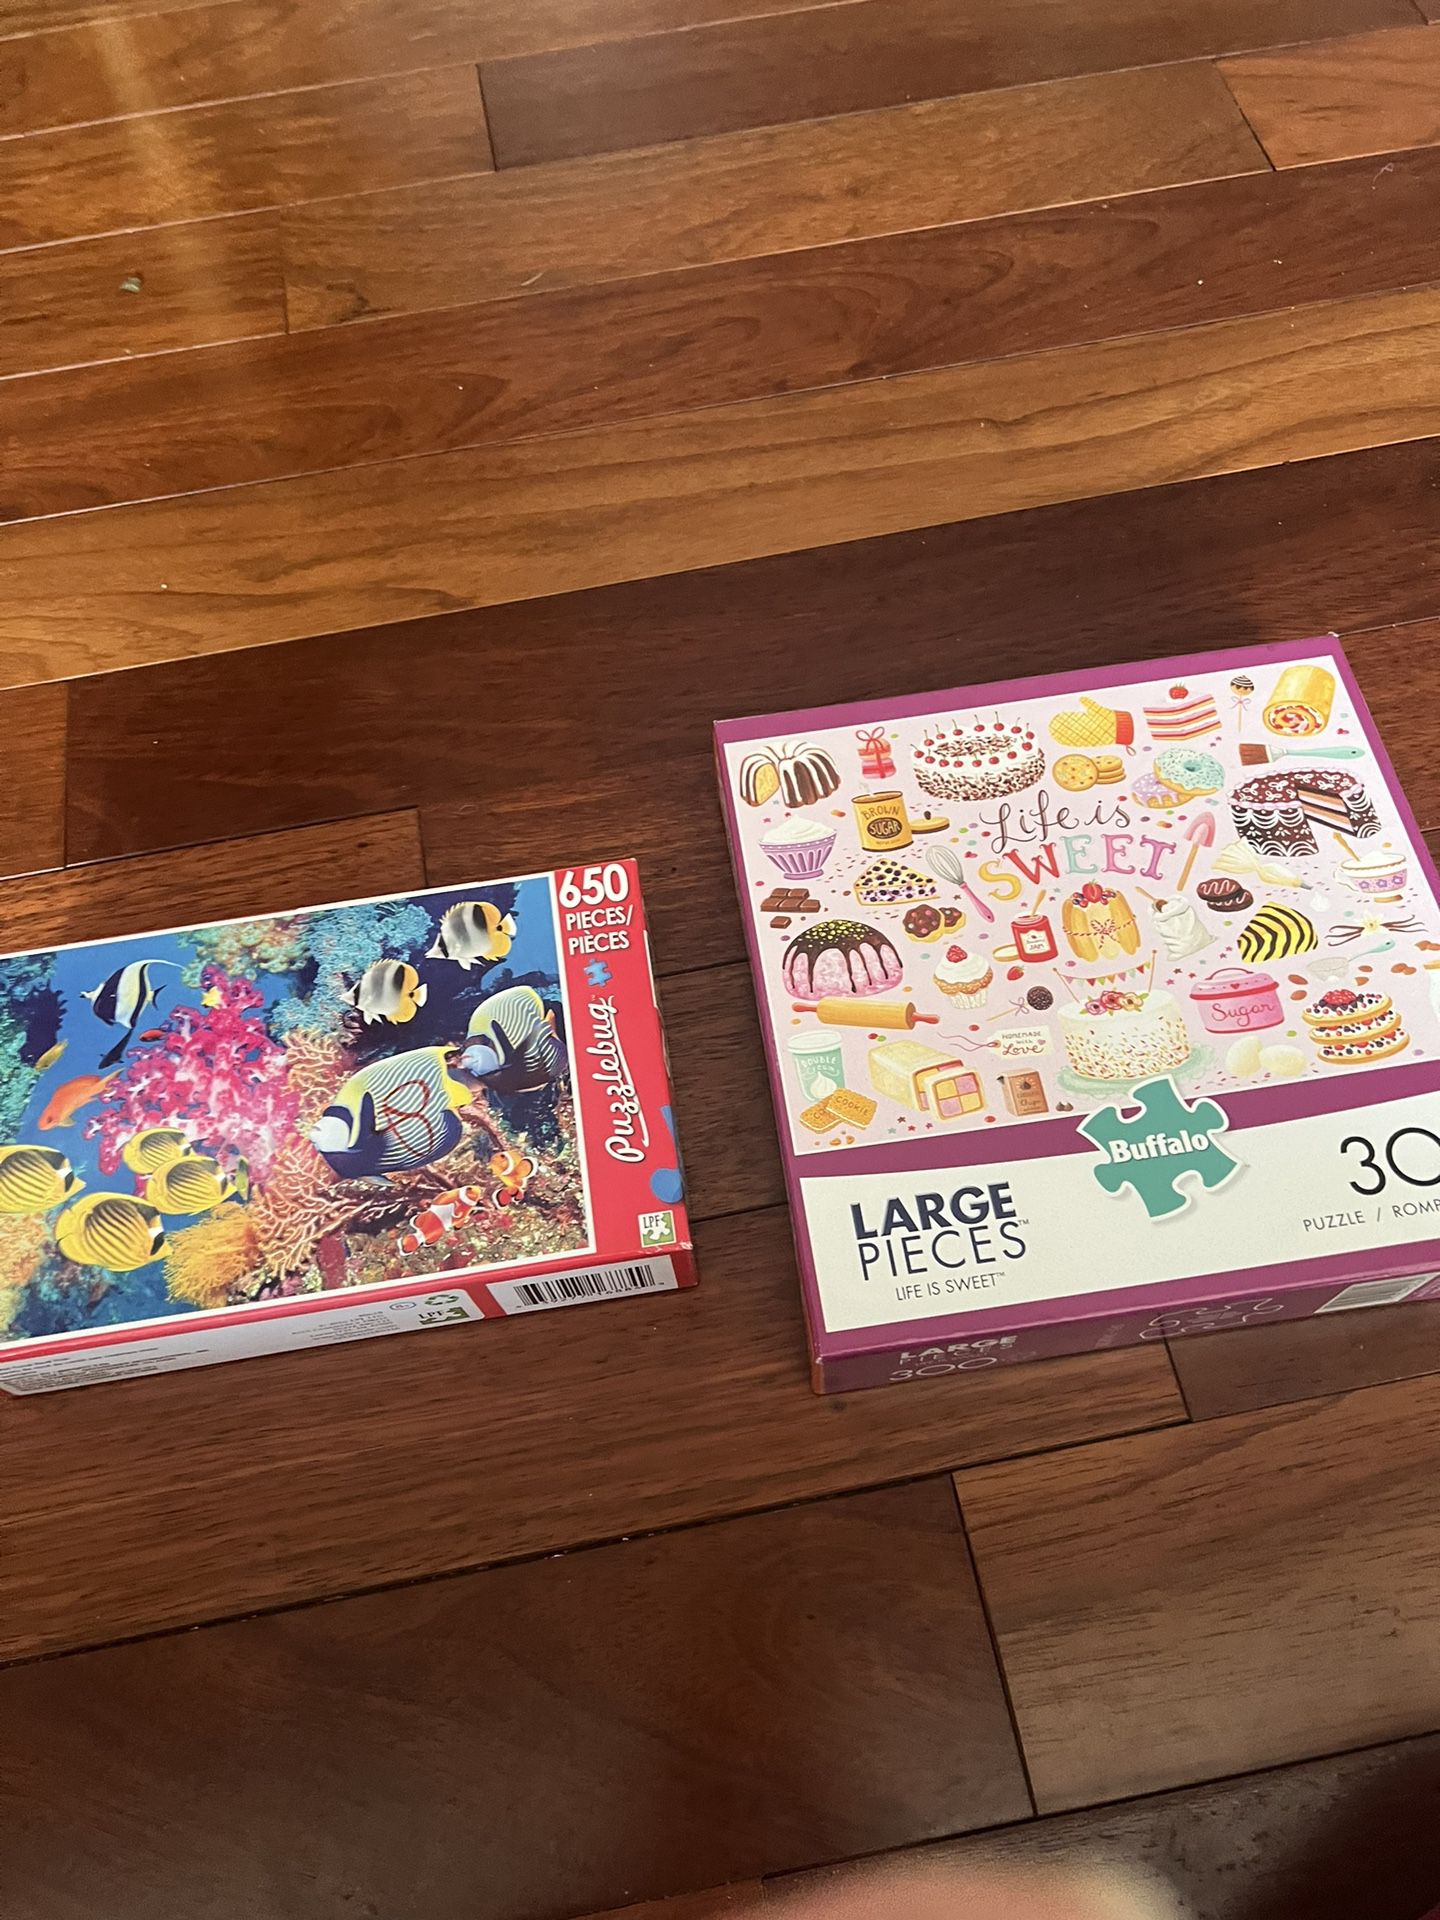 2 NEW Jigsaw Puzzle's